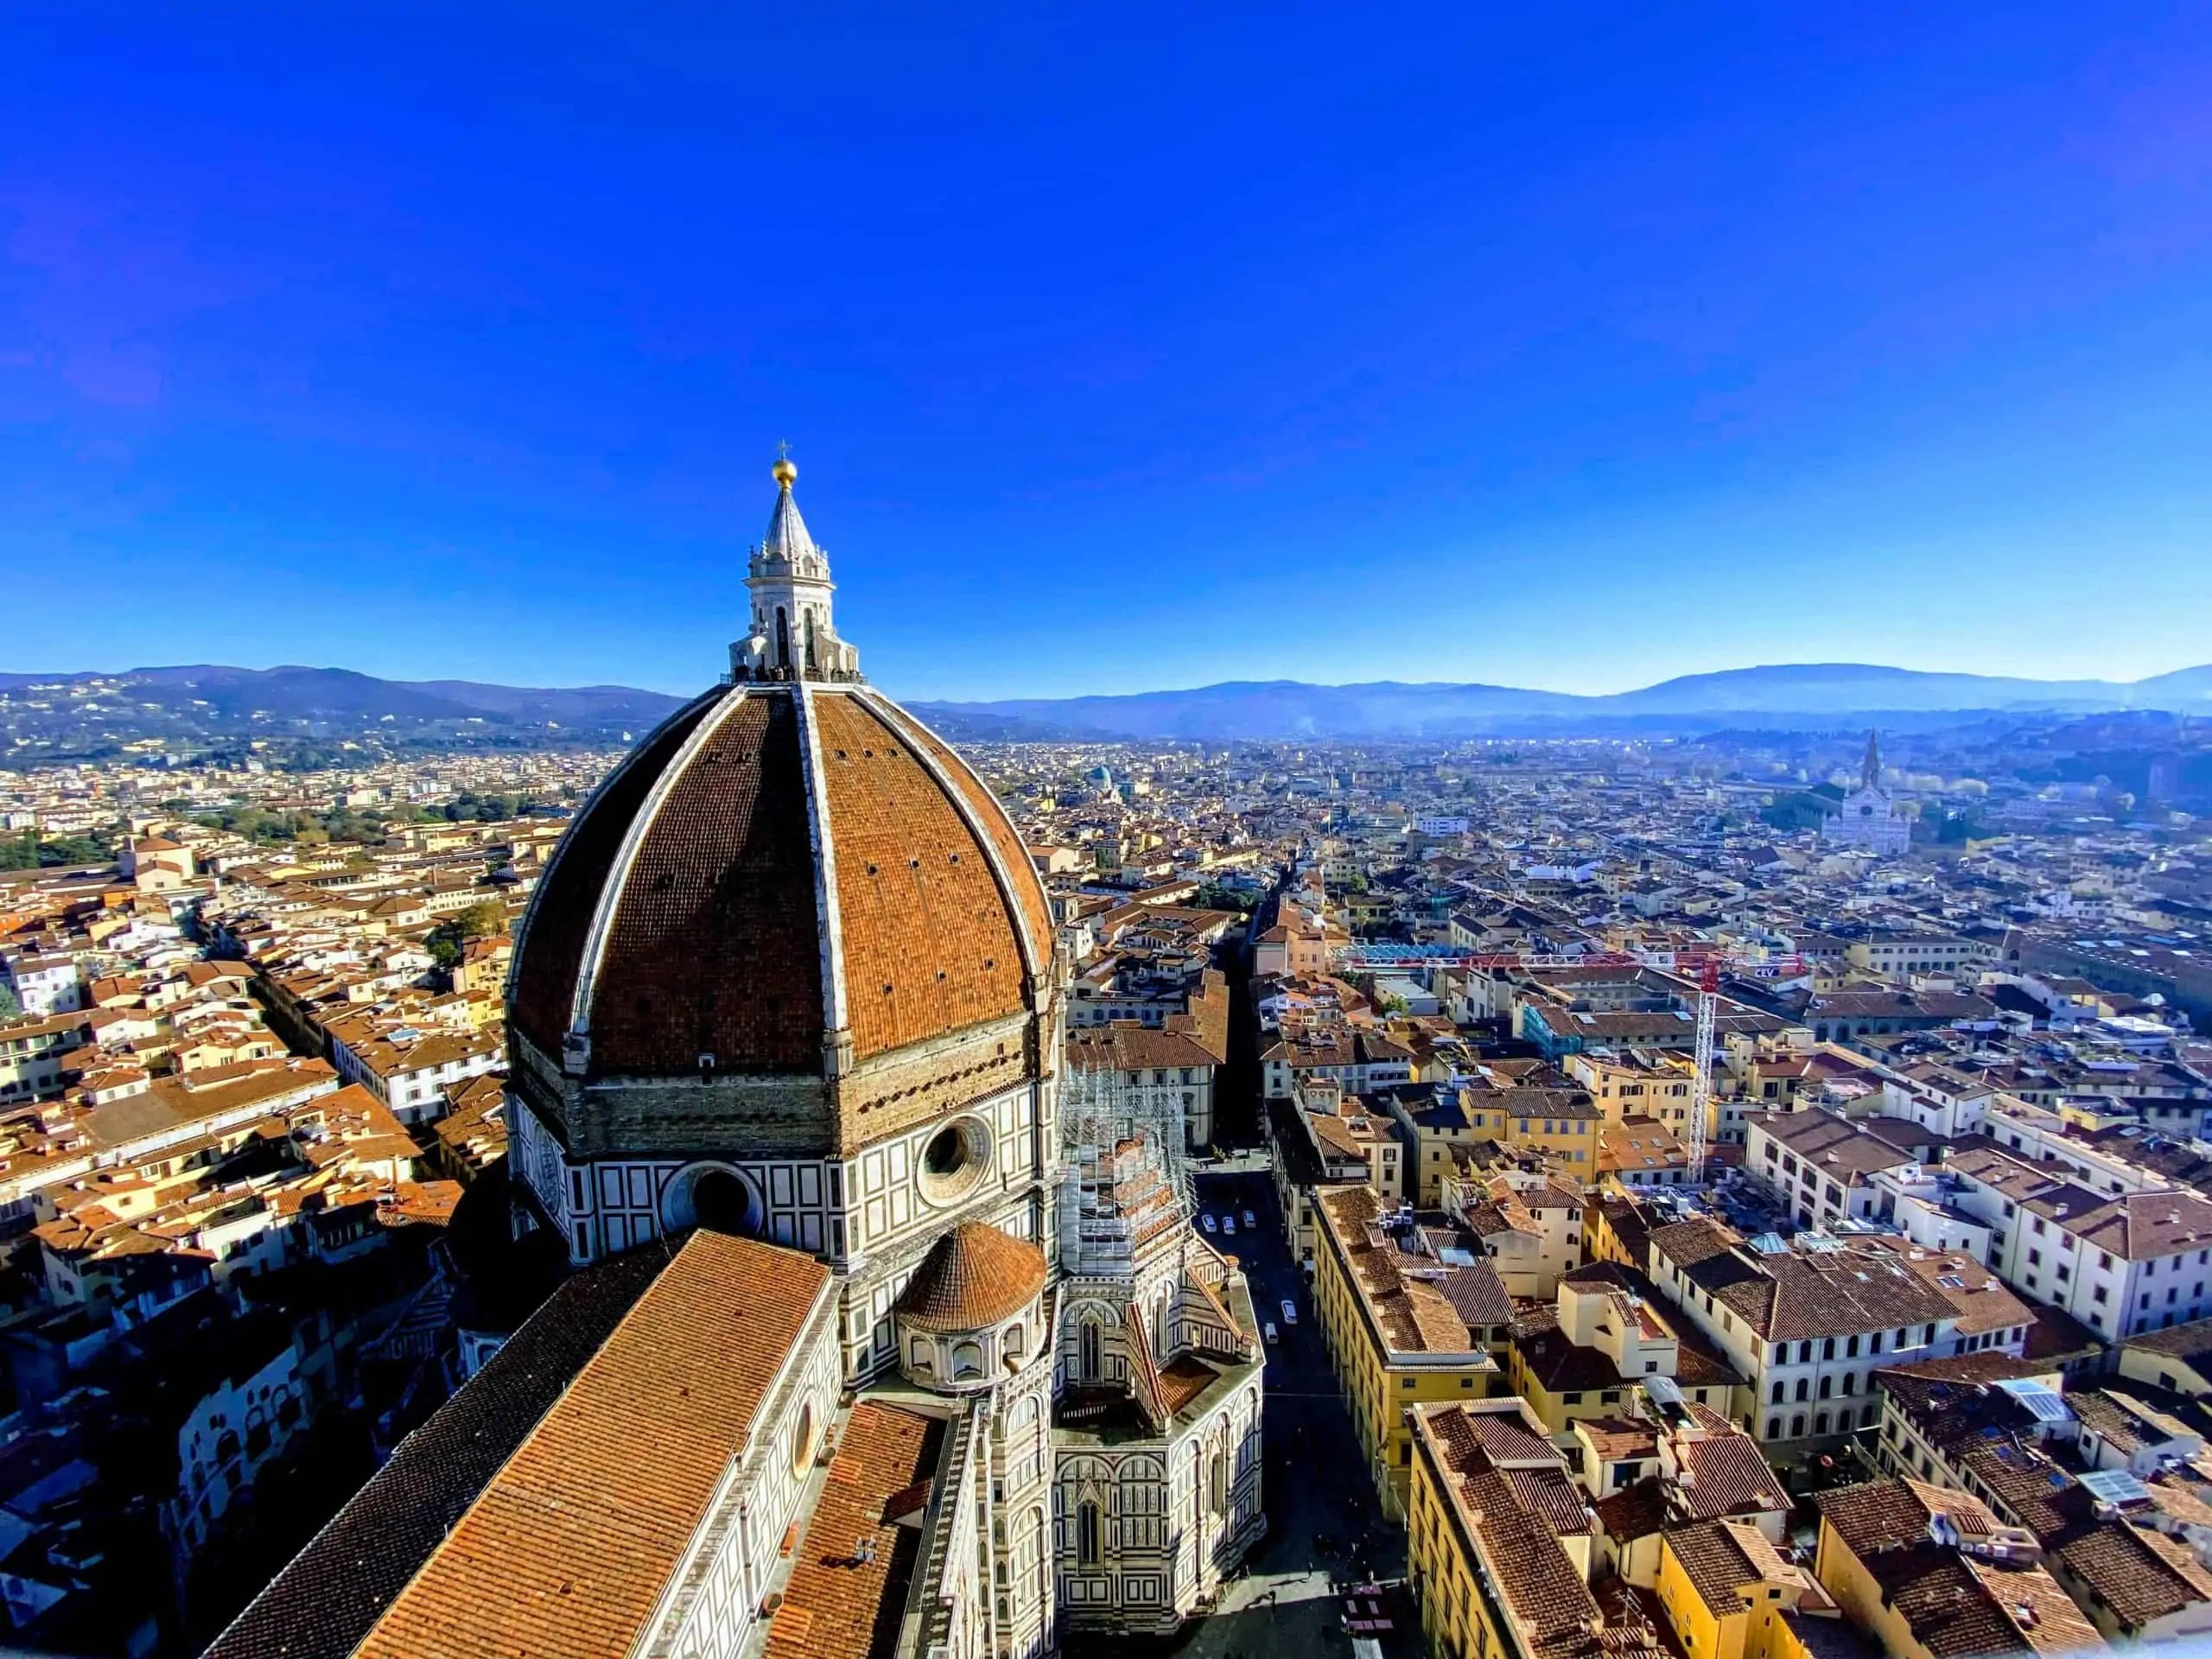 View of the Duomo, city, and surrounding Tuscan countryside from the top of Giotto's bell tower in Florence, Italy.